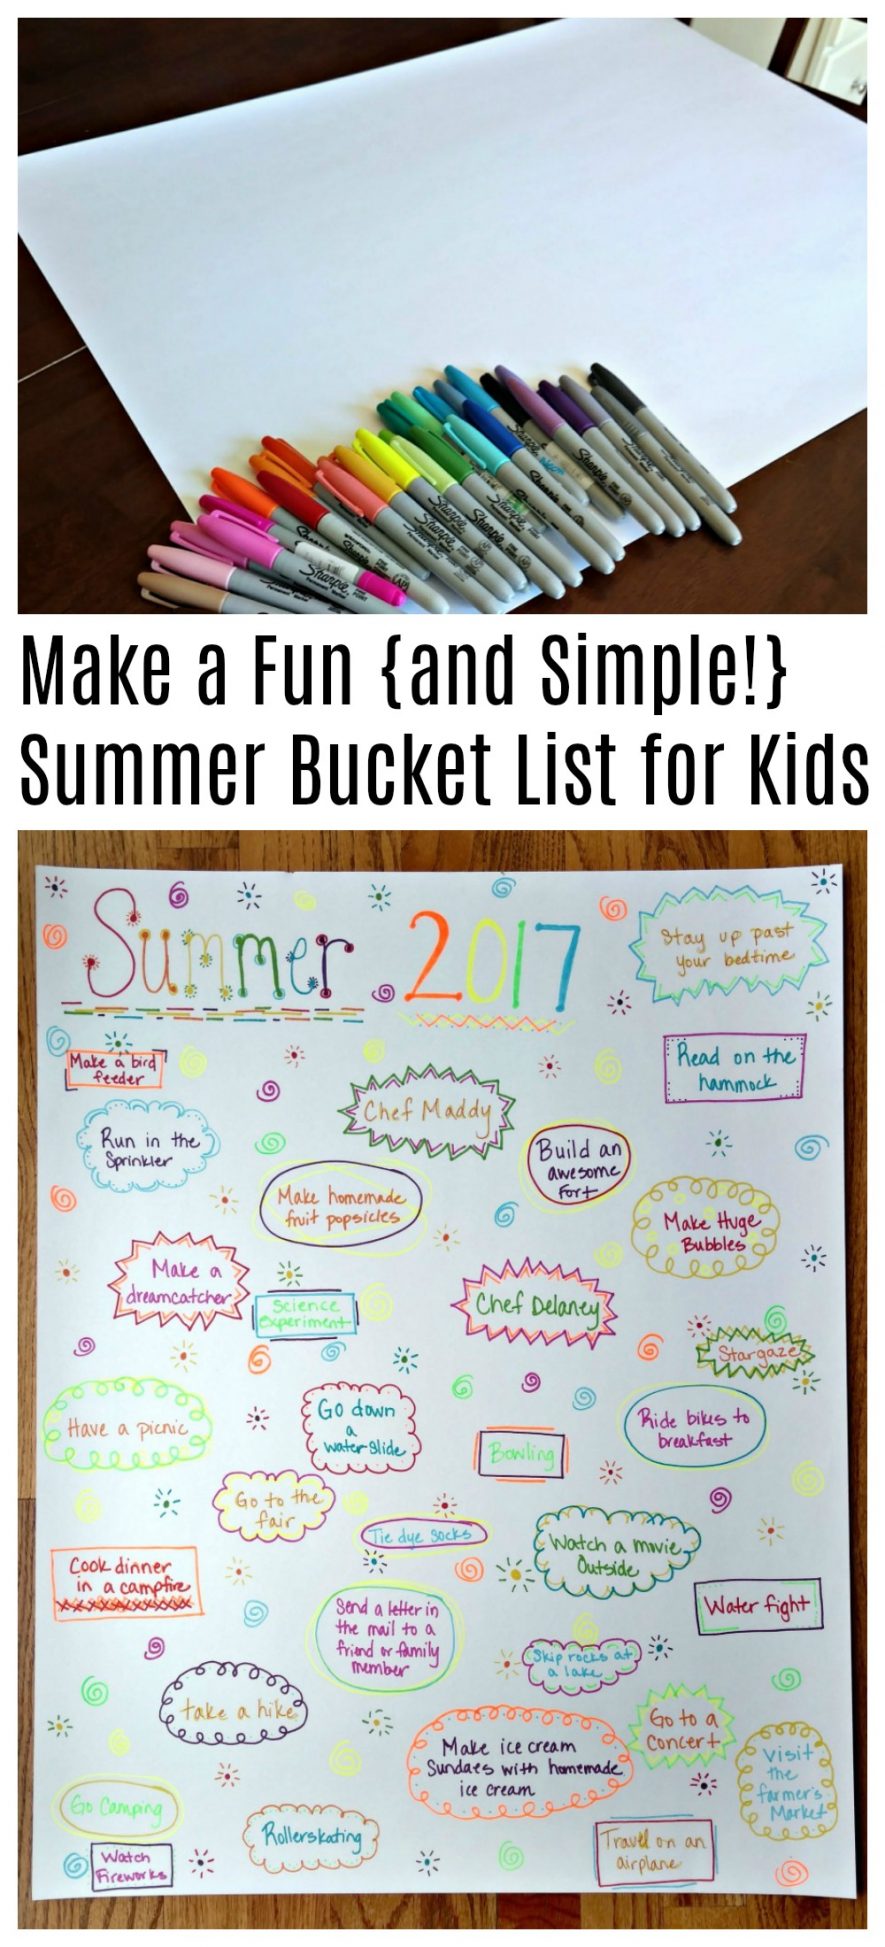 Tips for making a summer bucket list for kids